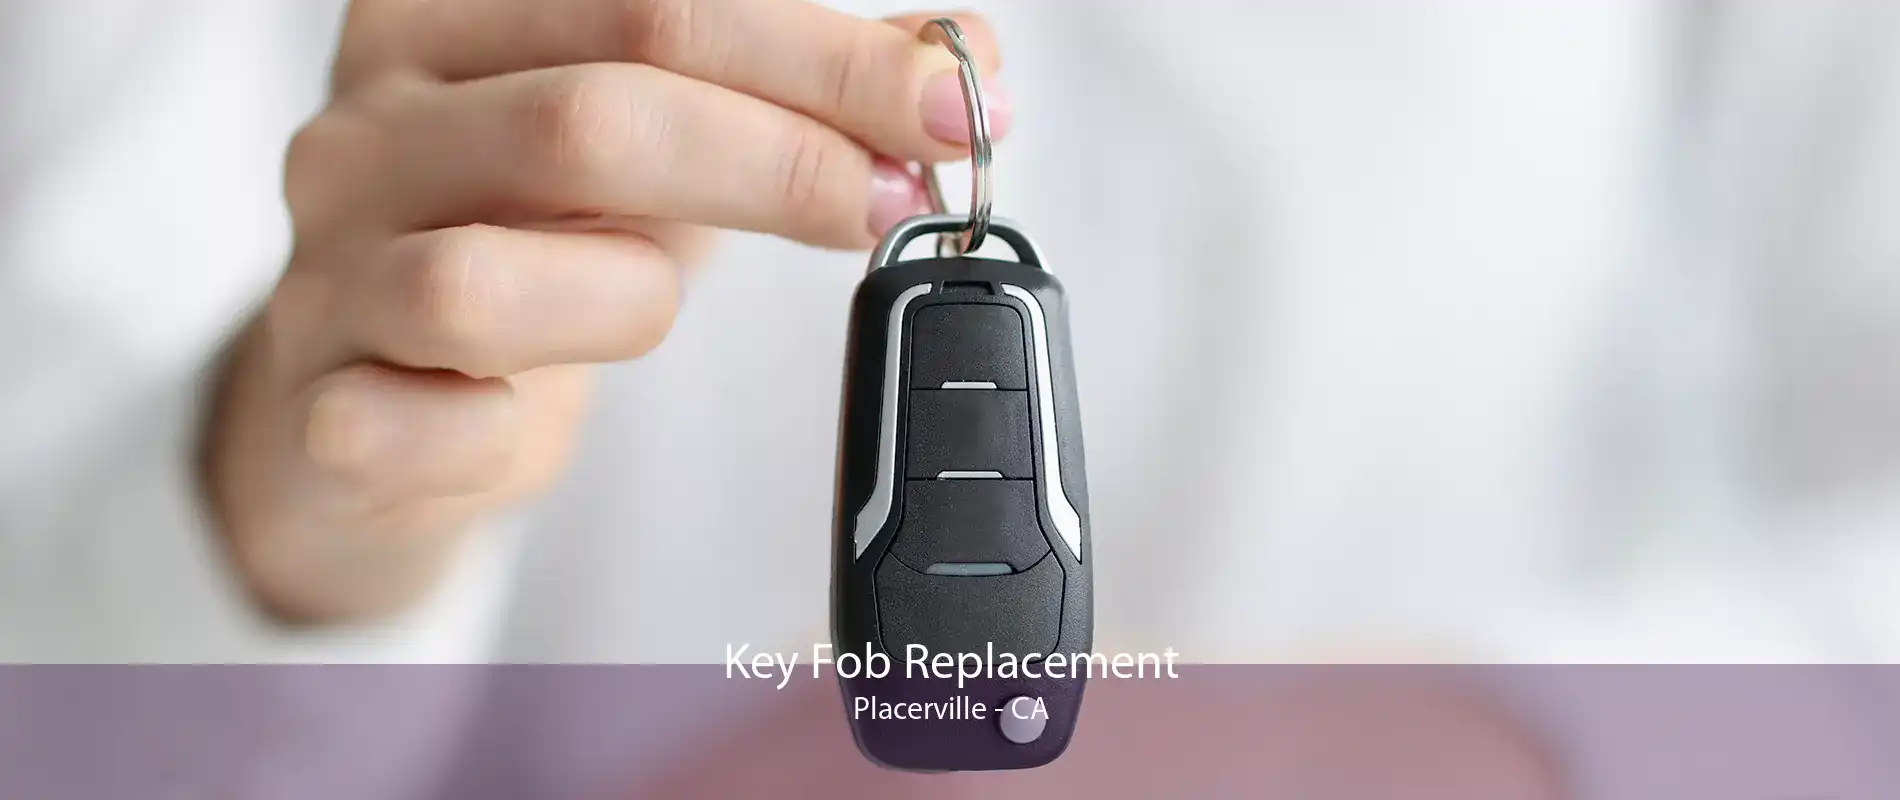 Key Fob Replacement Placerville - CA